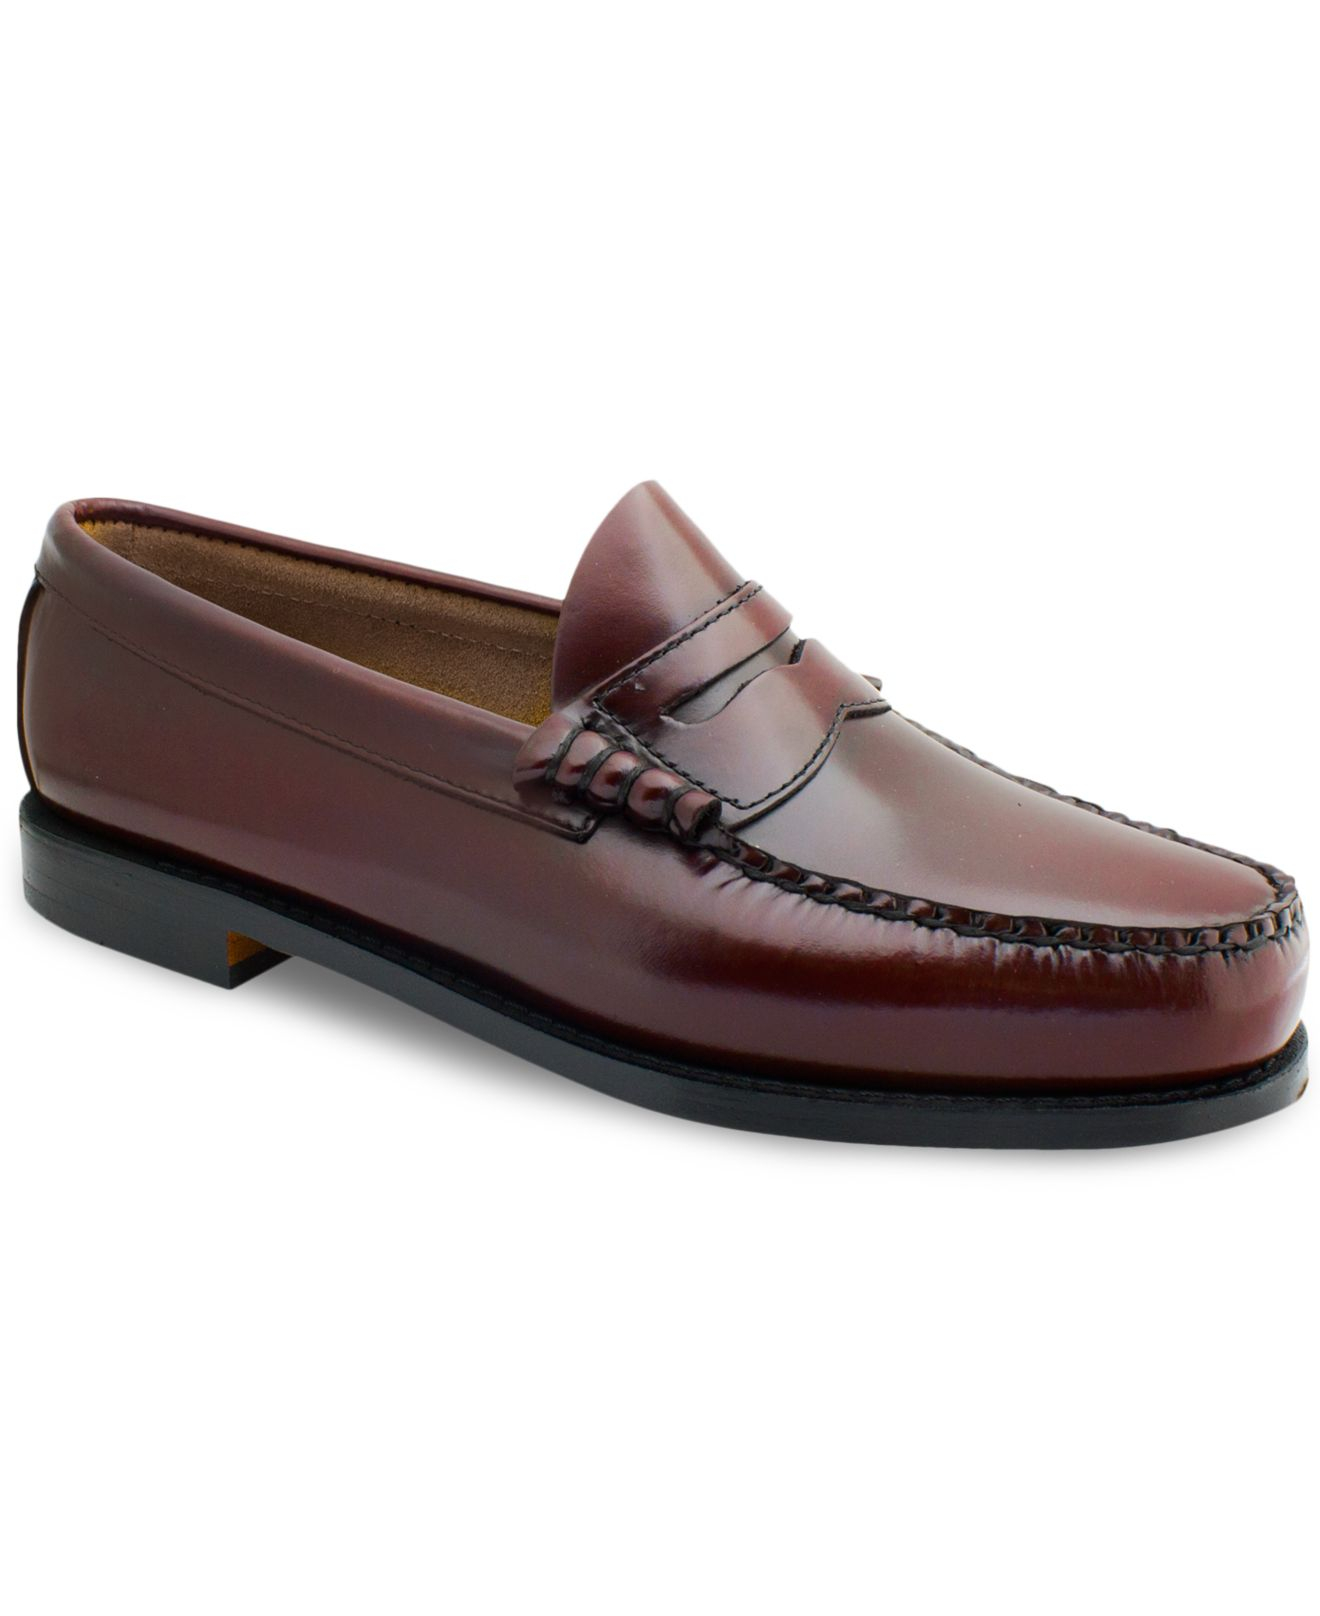 Lyst - G.H. Bass & Co. G. H. Bass & Co. Larson Penny Loafers in Purple ...